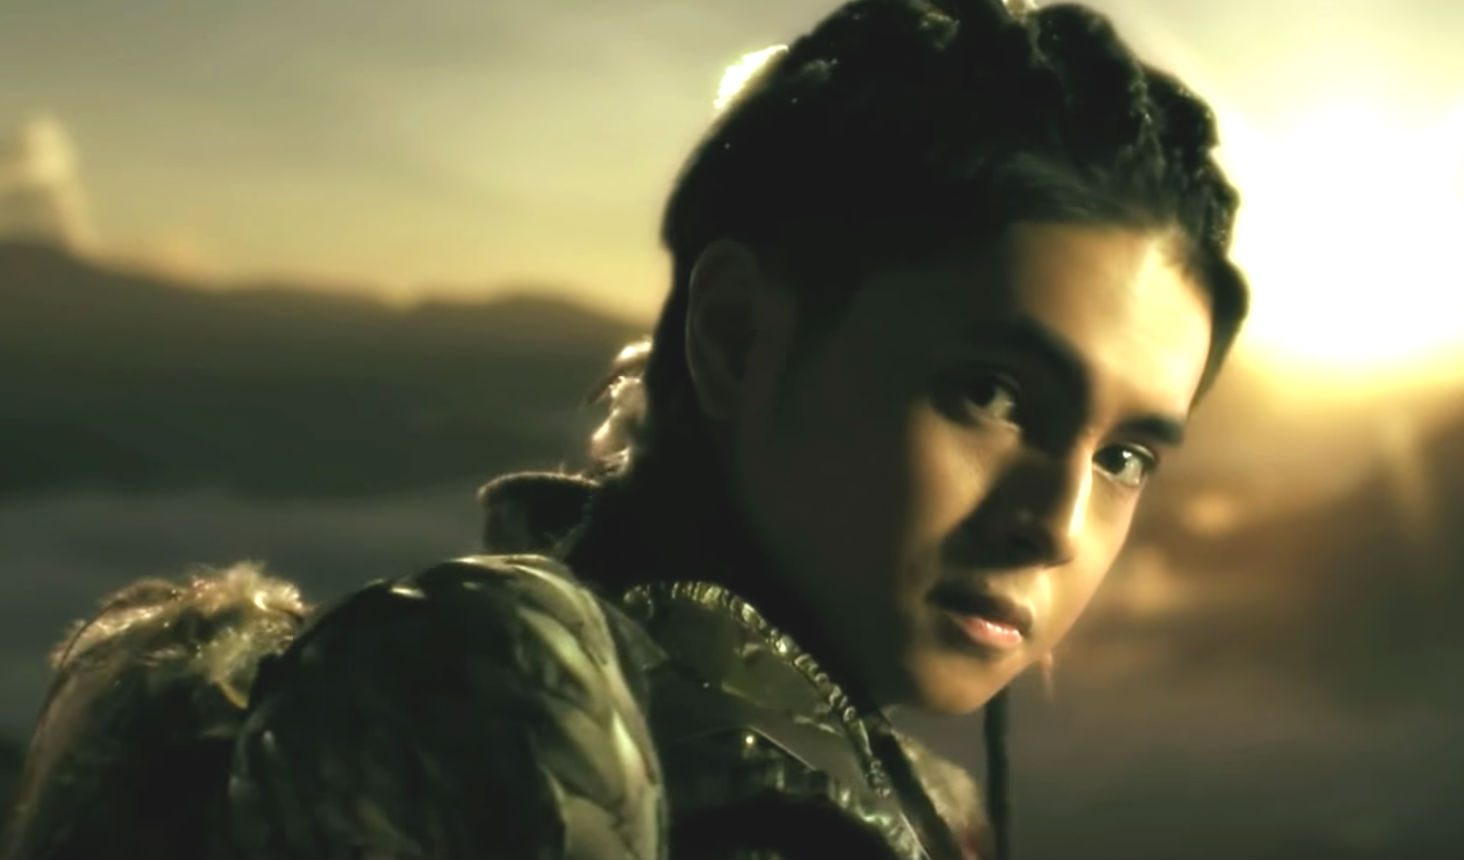 WATCH: Miguel Tanfelix back in Mulawin role on ‘Encantadia’